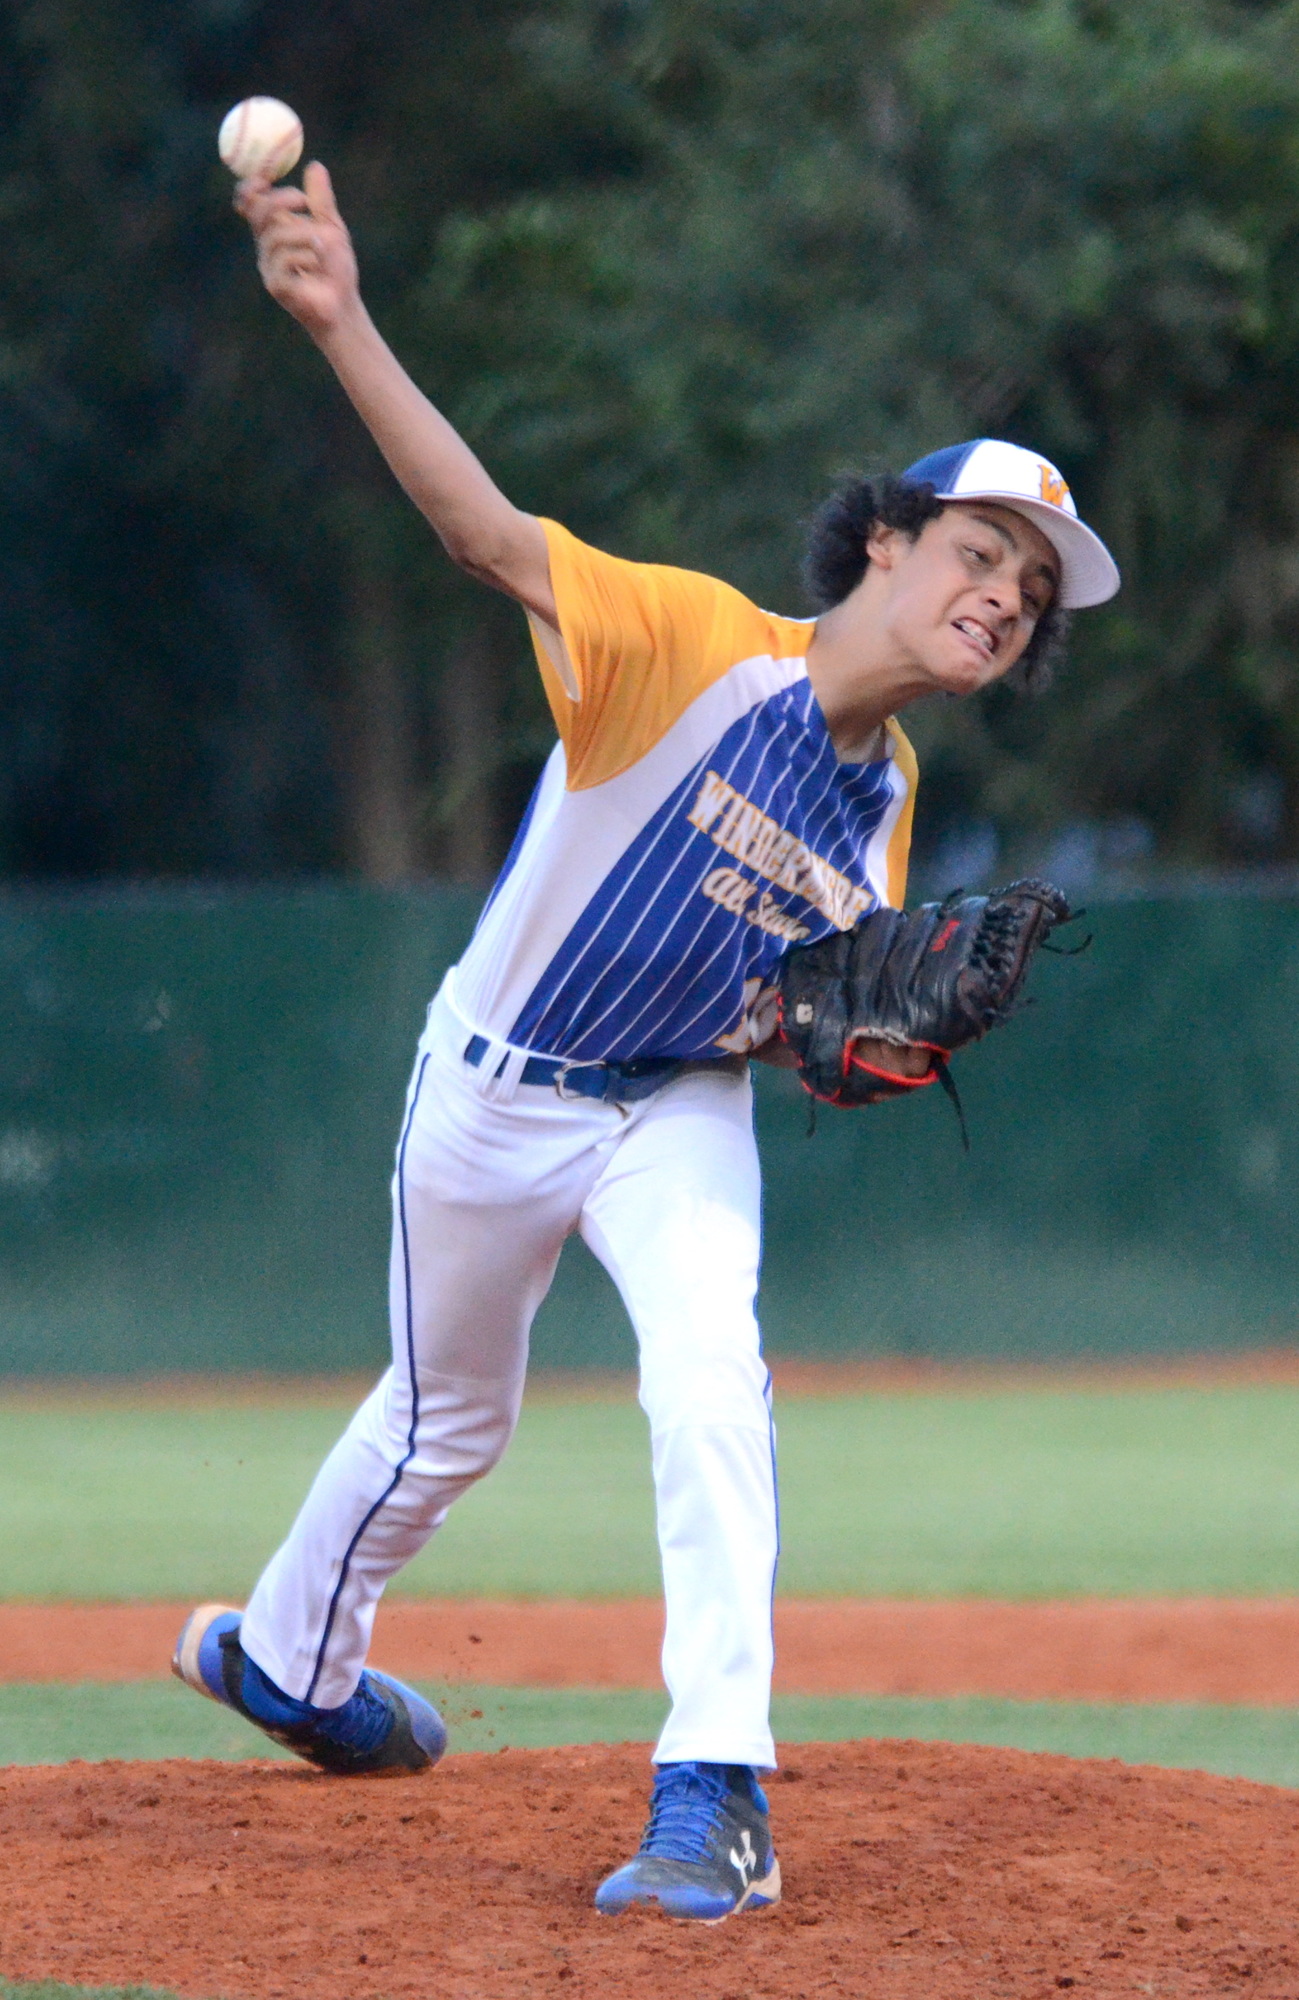 Oscar Perez was dynamic on the mound for Windermere.